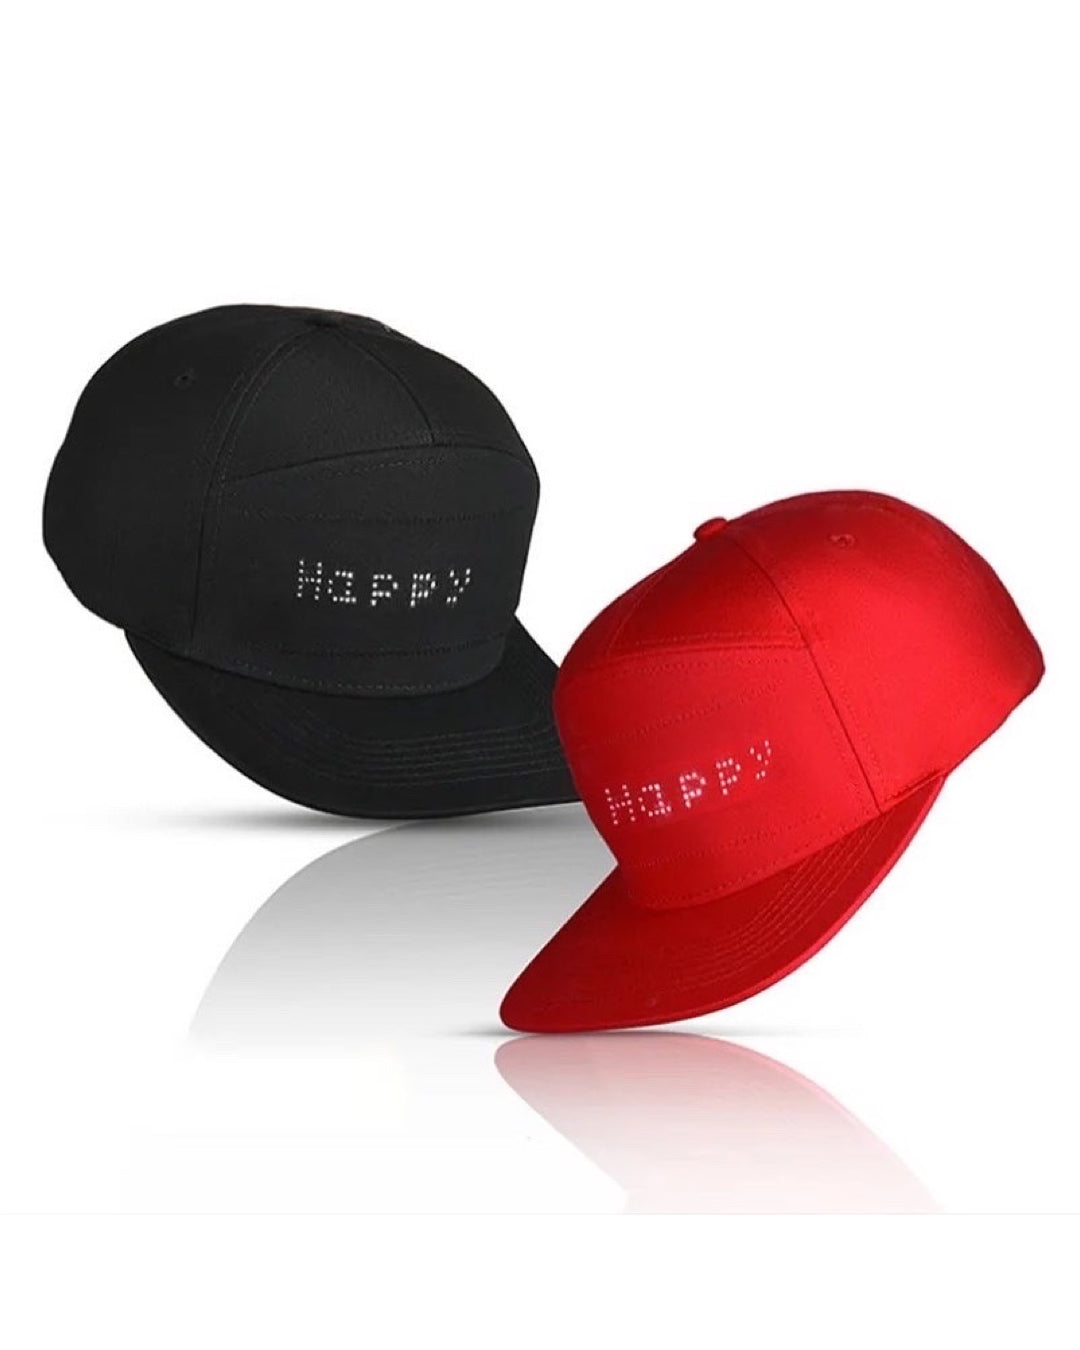 LED app controlled display hats